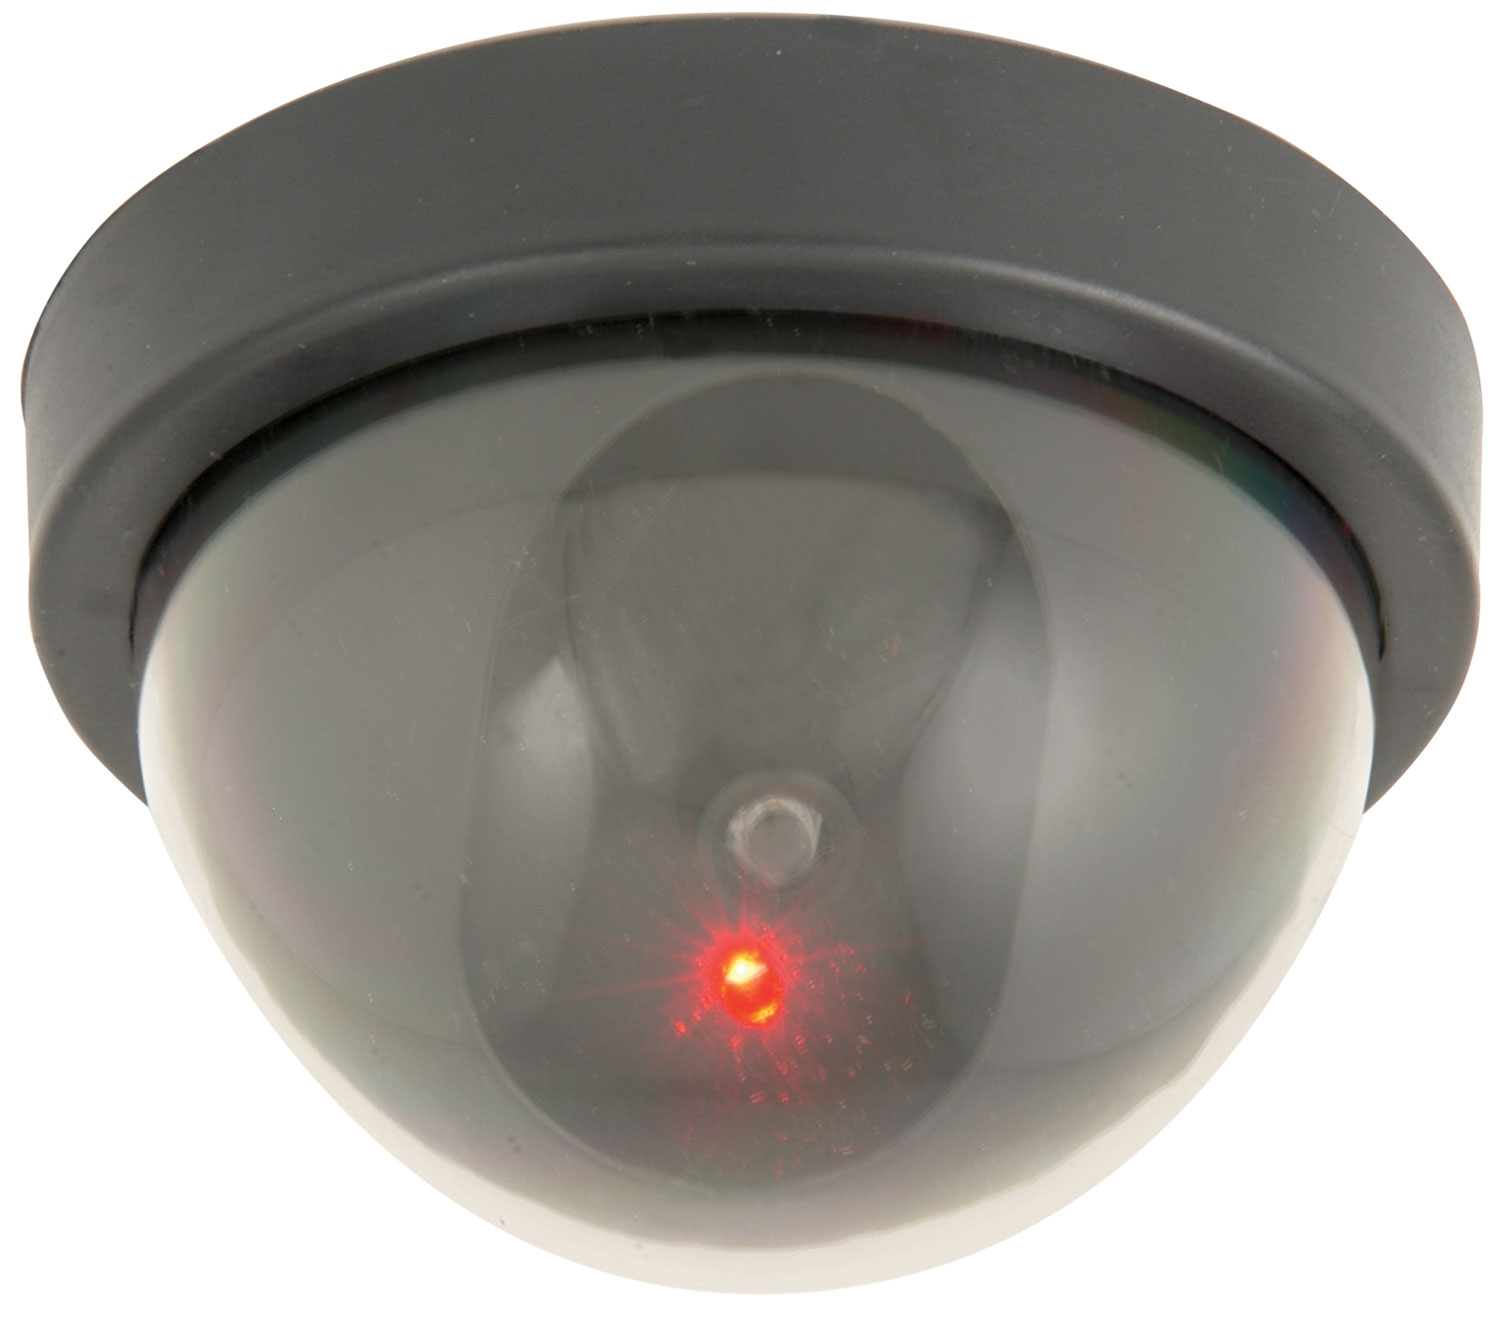 Dummy Dome Camera Dummy Dome Camera with 1 Red LED